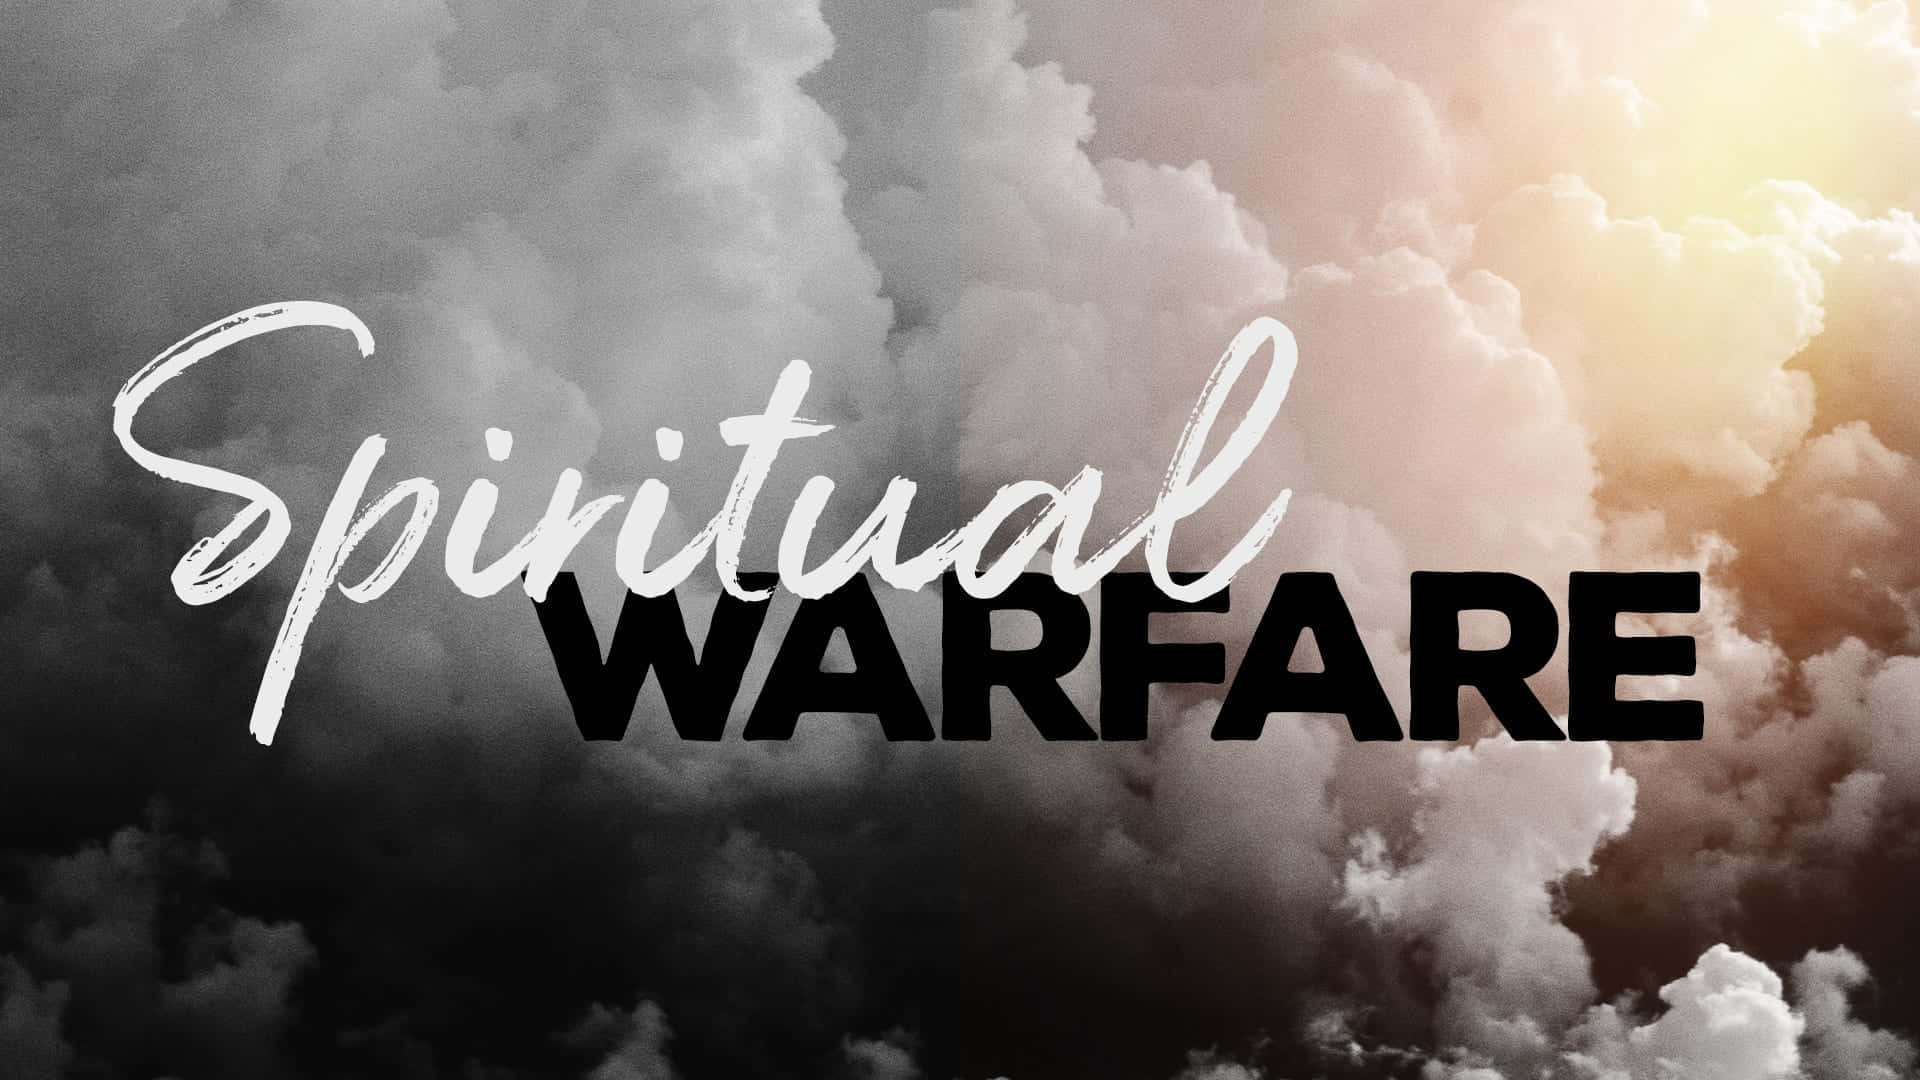 Defeating spiritual warfare with trust and faith in God Wallpaper